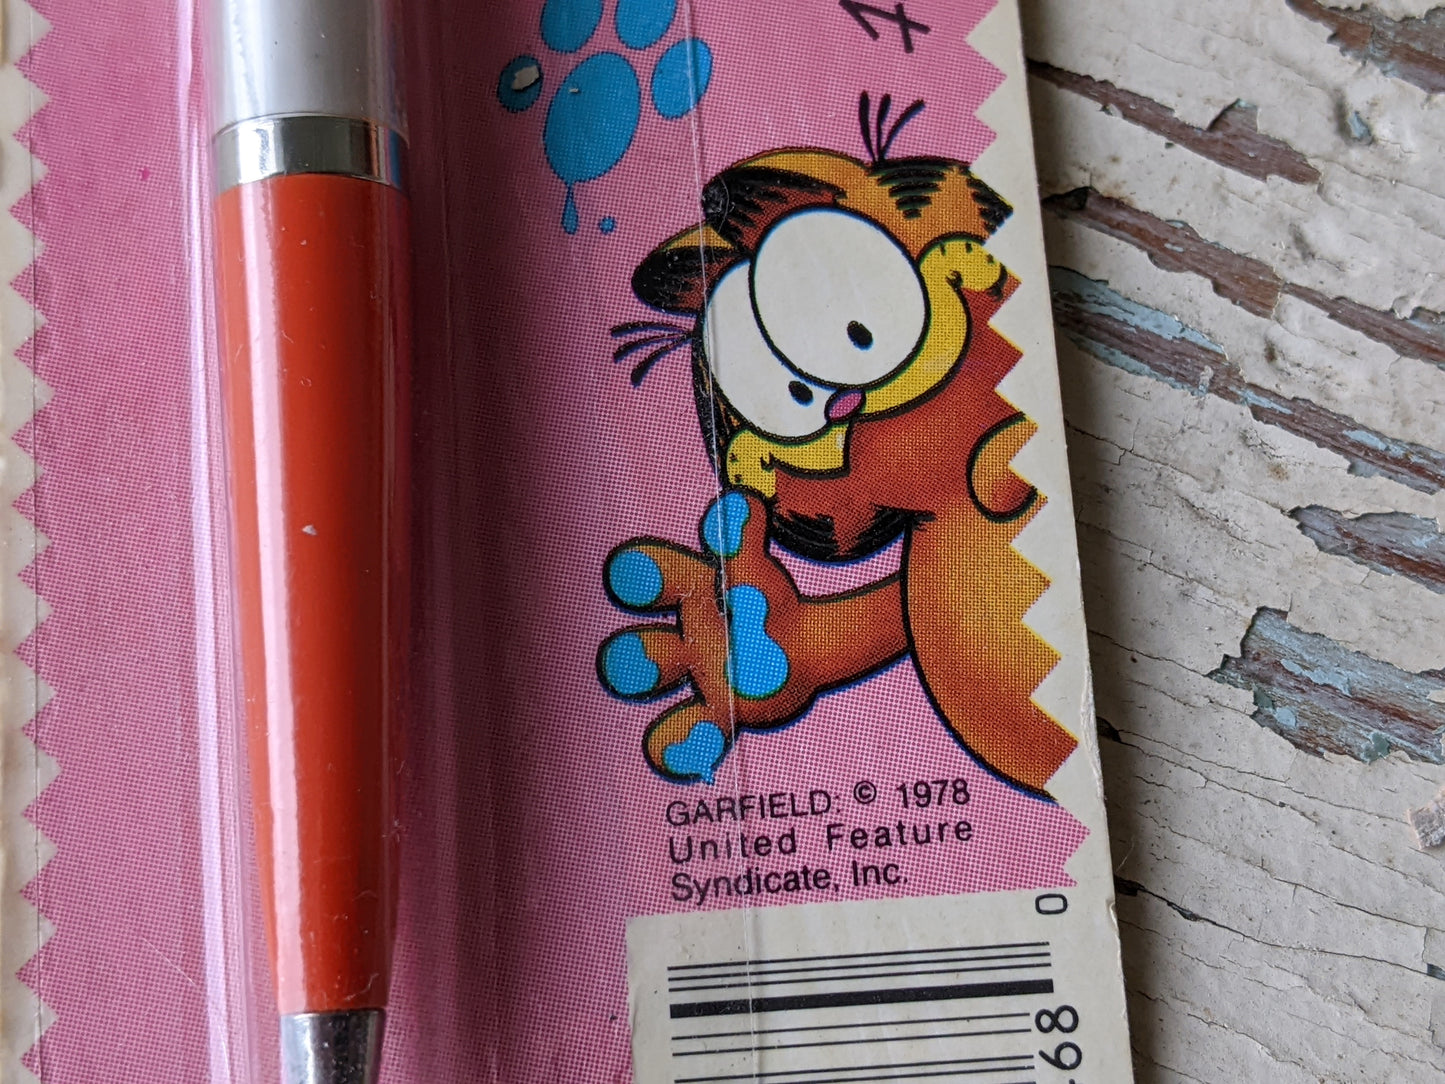 1978 Garfield Pen Football Hike NOS New Old Stock United Feature Syndicate Inc !! Awesome Retro Gifts !! Lasagna For Everyone !!